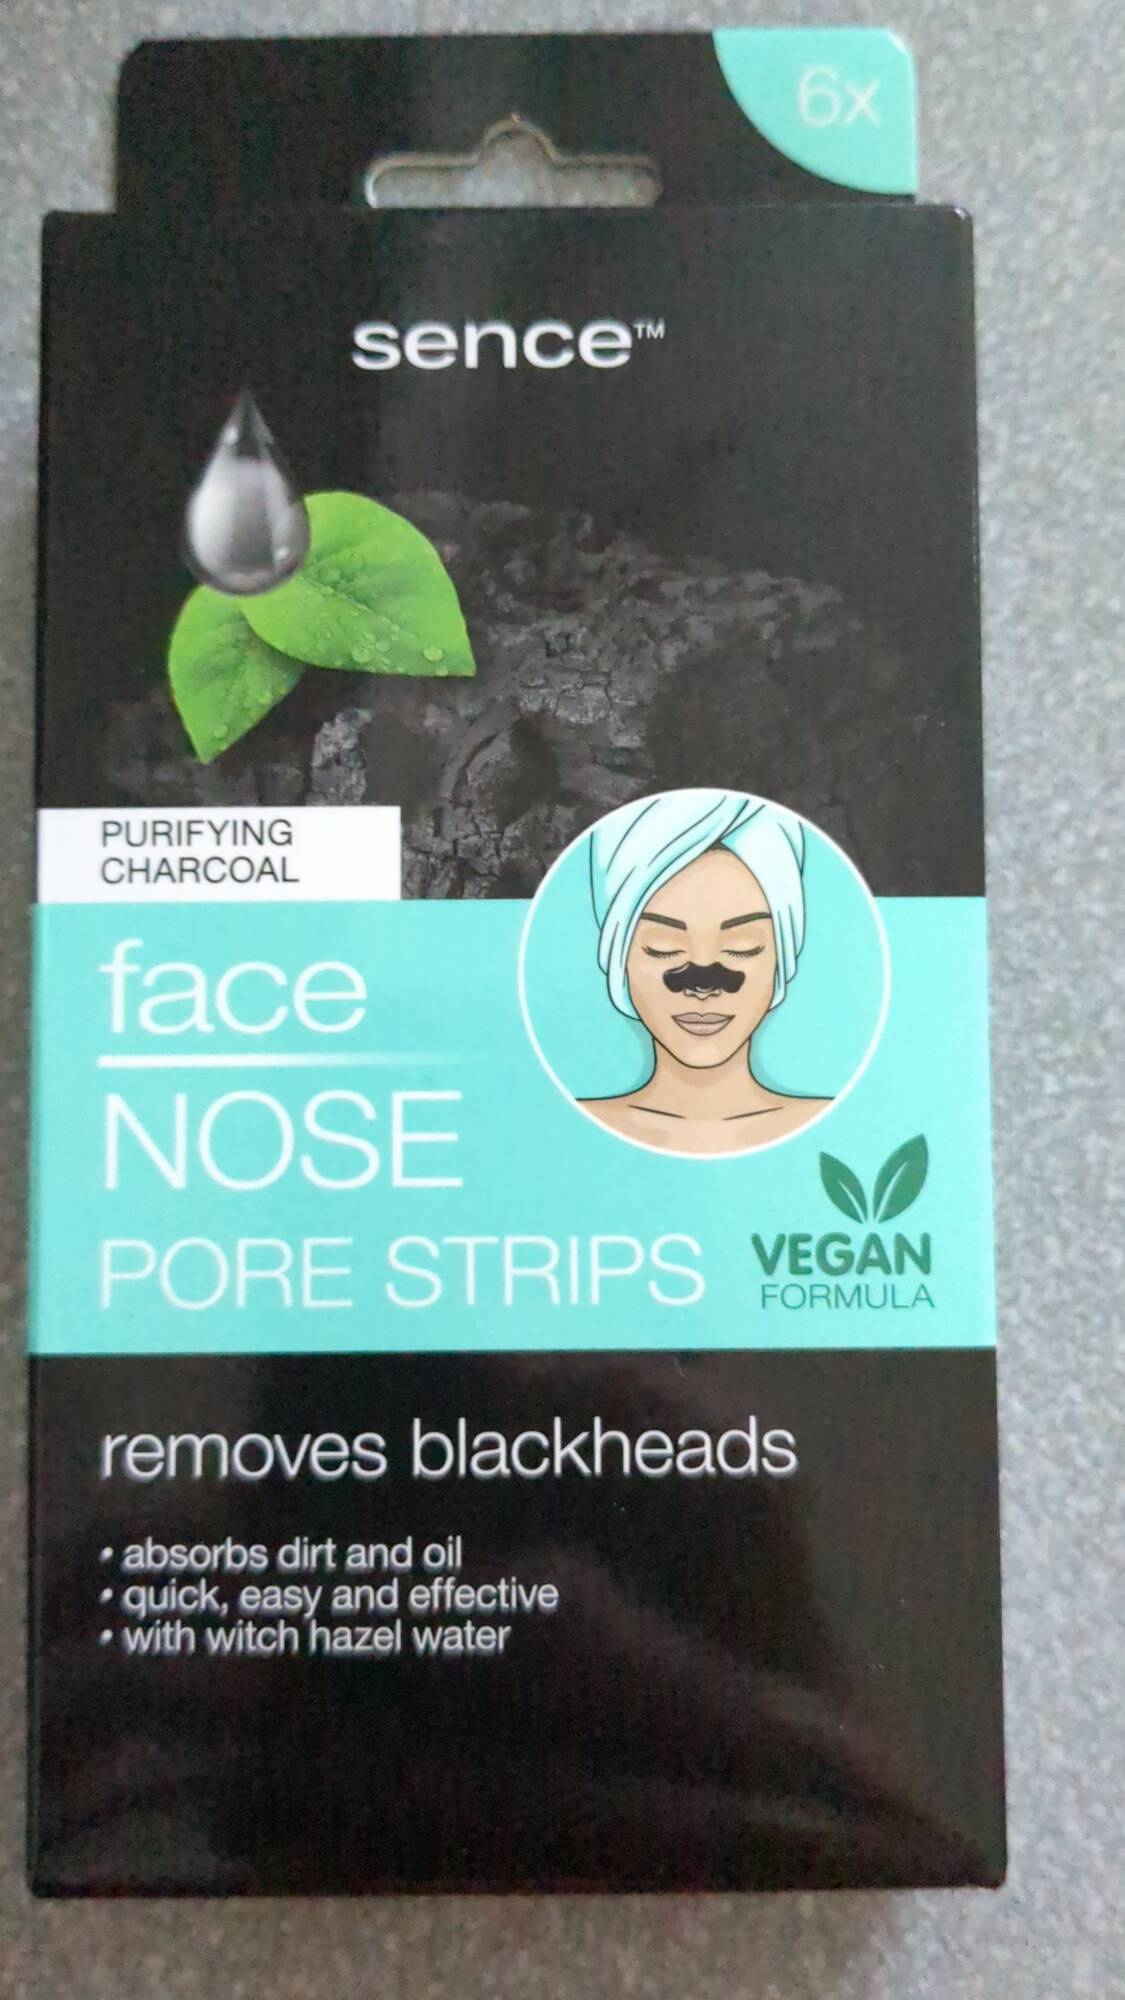 SENCE - Purifying charcoal - Face nose pore strips 